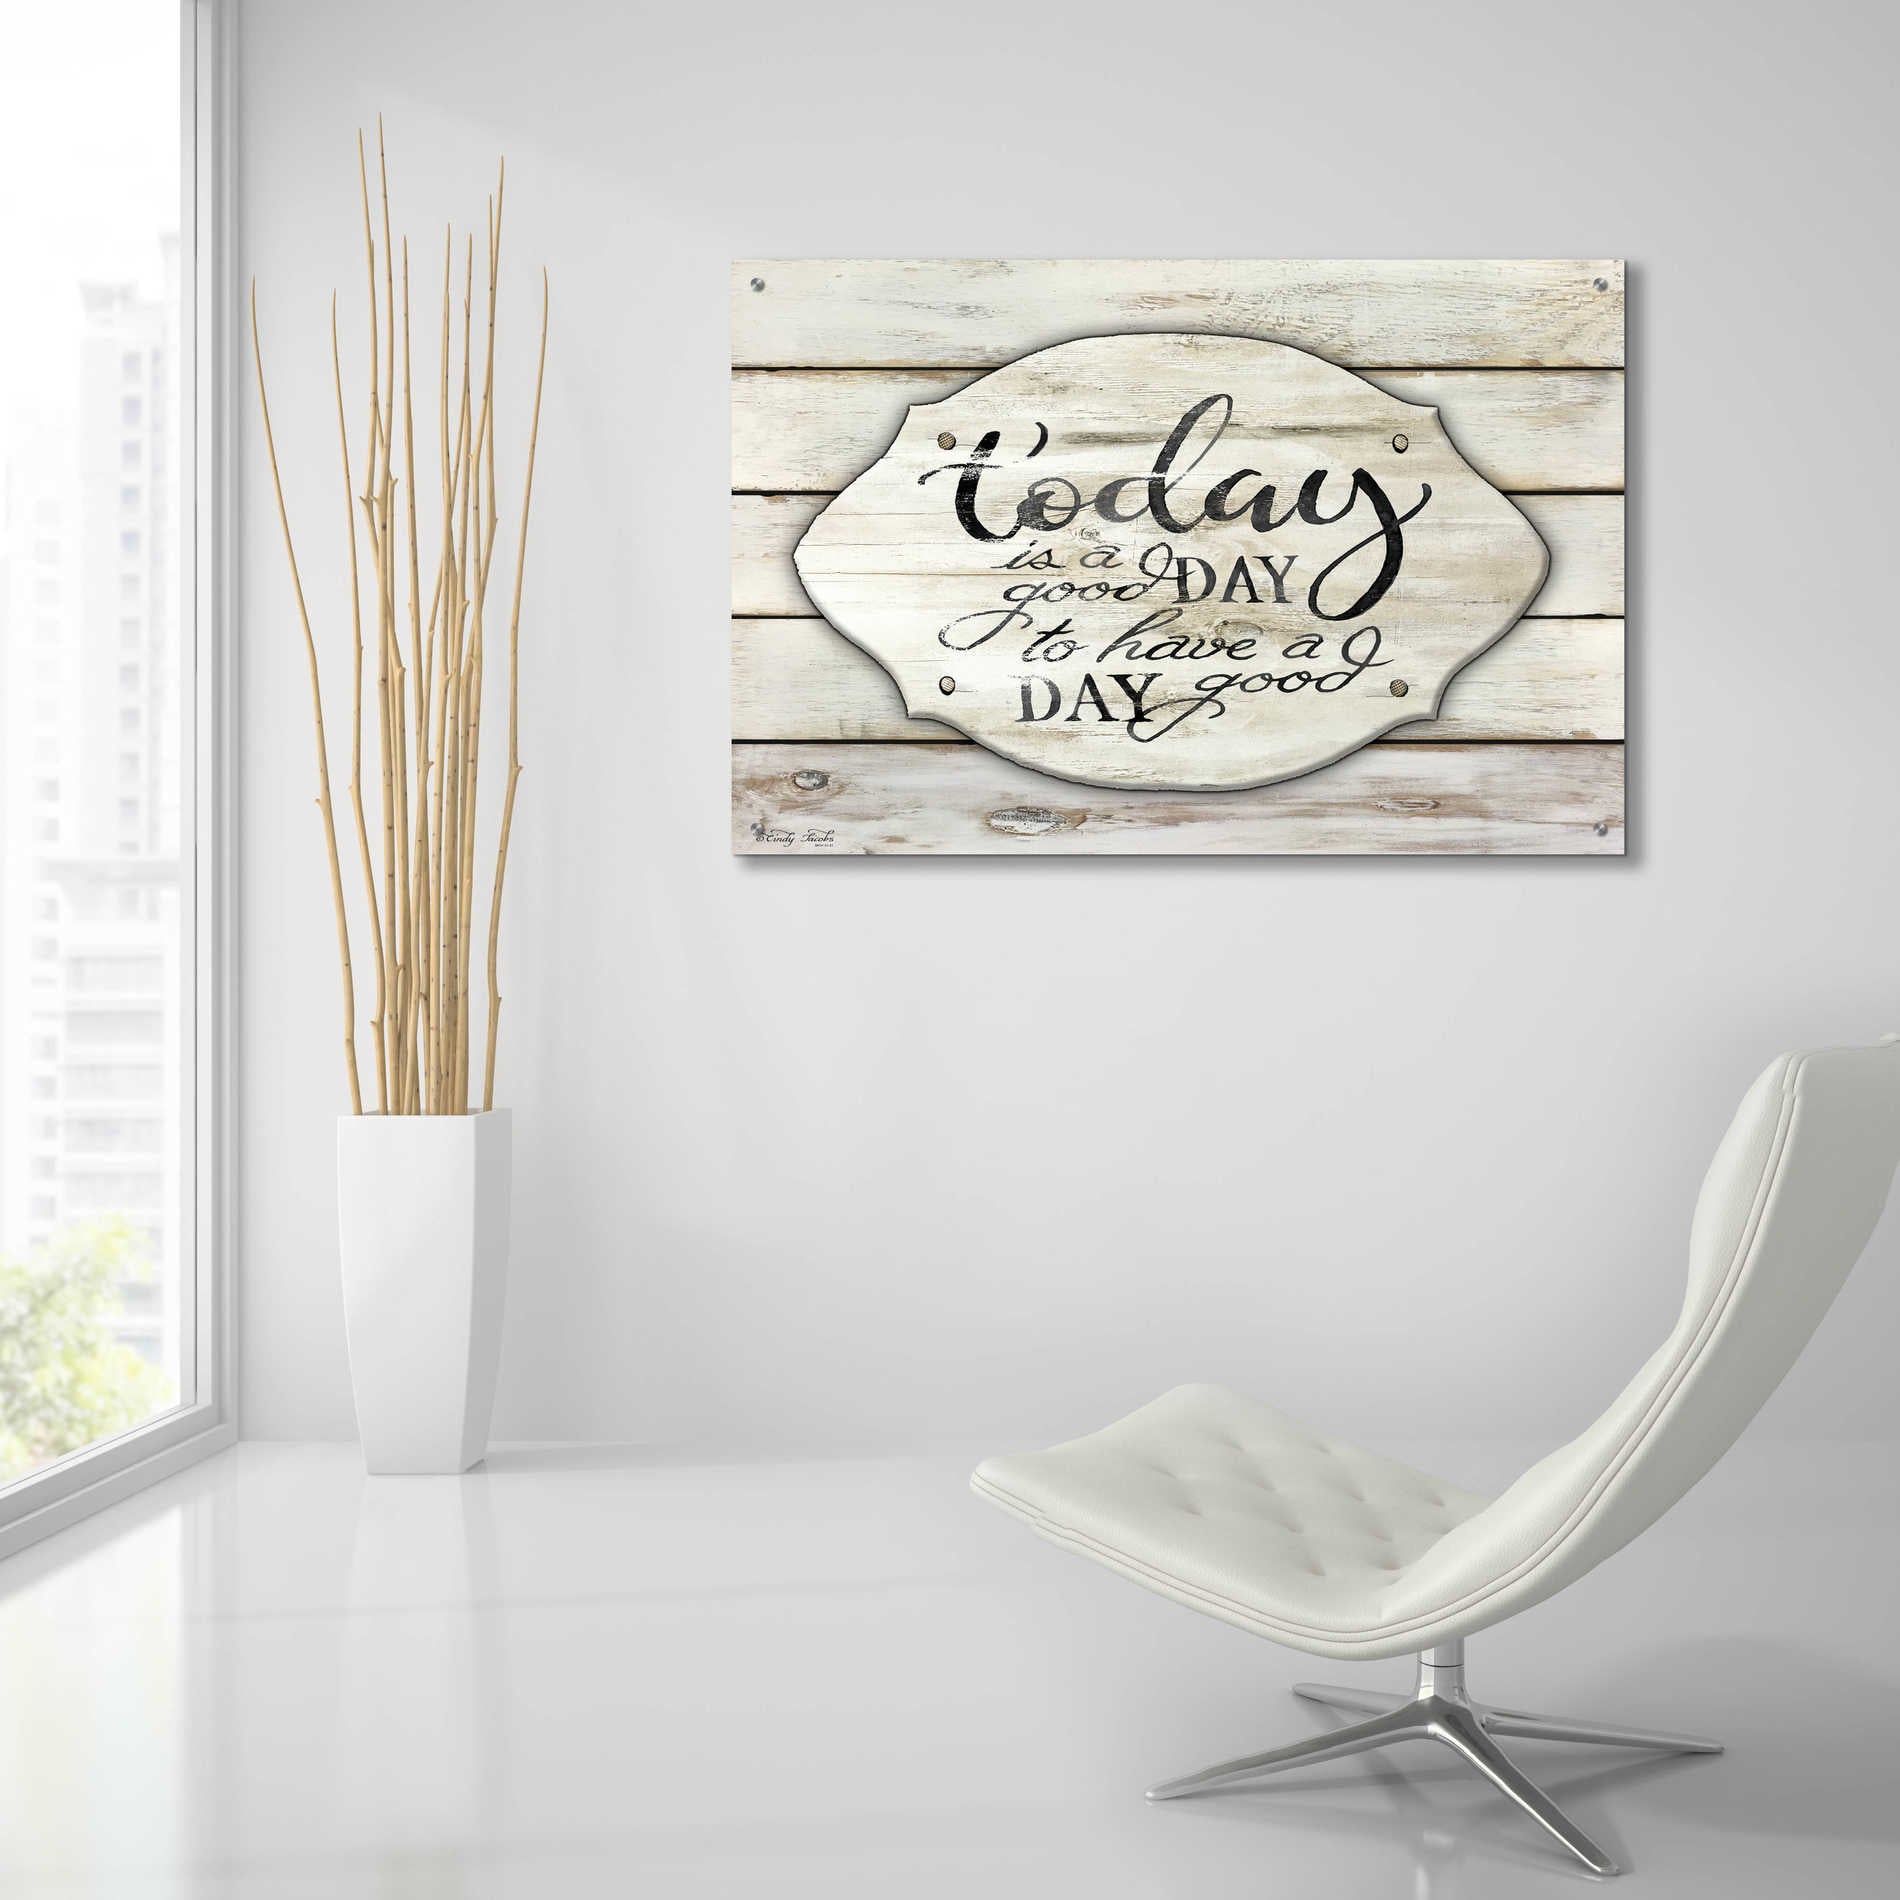 Epic Art 'Today is a Good Day' by Cindy Jacobs, Acrylic Glass Wall Art,36x24